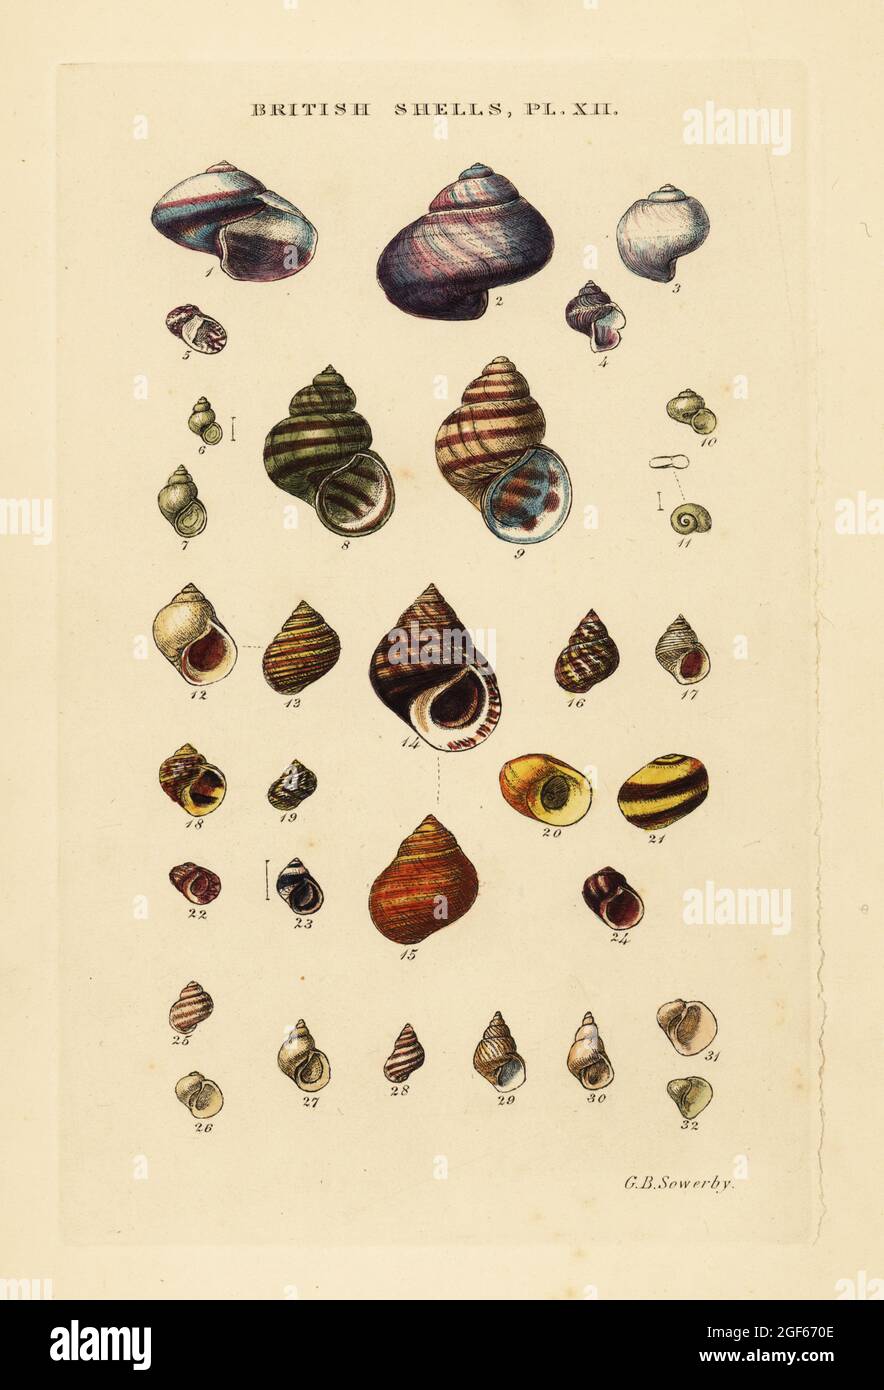 Wentletraps, Ianthina, freshwater shells, Bithynia, Littorina, Lacuna, etc. Handcoloured copperplate engraving by George Brettingham Sowerby from his own Illustrated Index of British Shells, Sowerby and Simpkin, Marshall & Co., London, 1859. George Brettingham Sowerby II (1812-1884), British naturalist, illustrator, and conchologist. Stock Photo